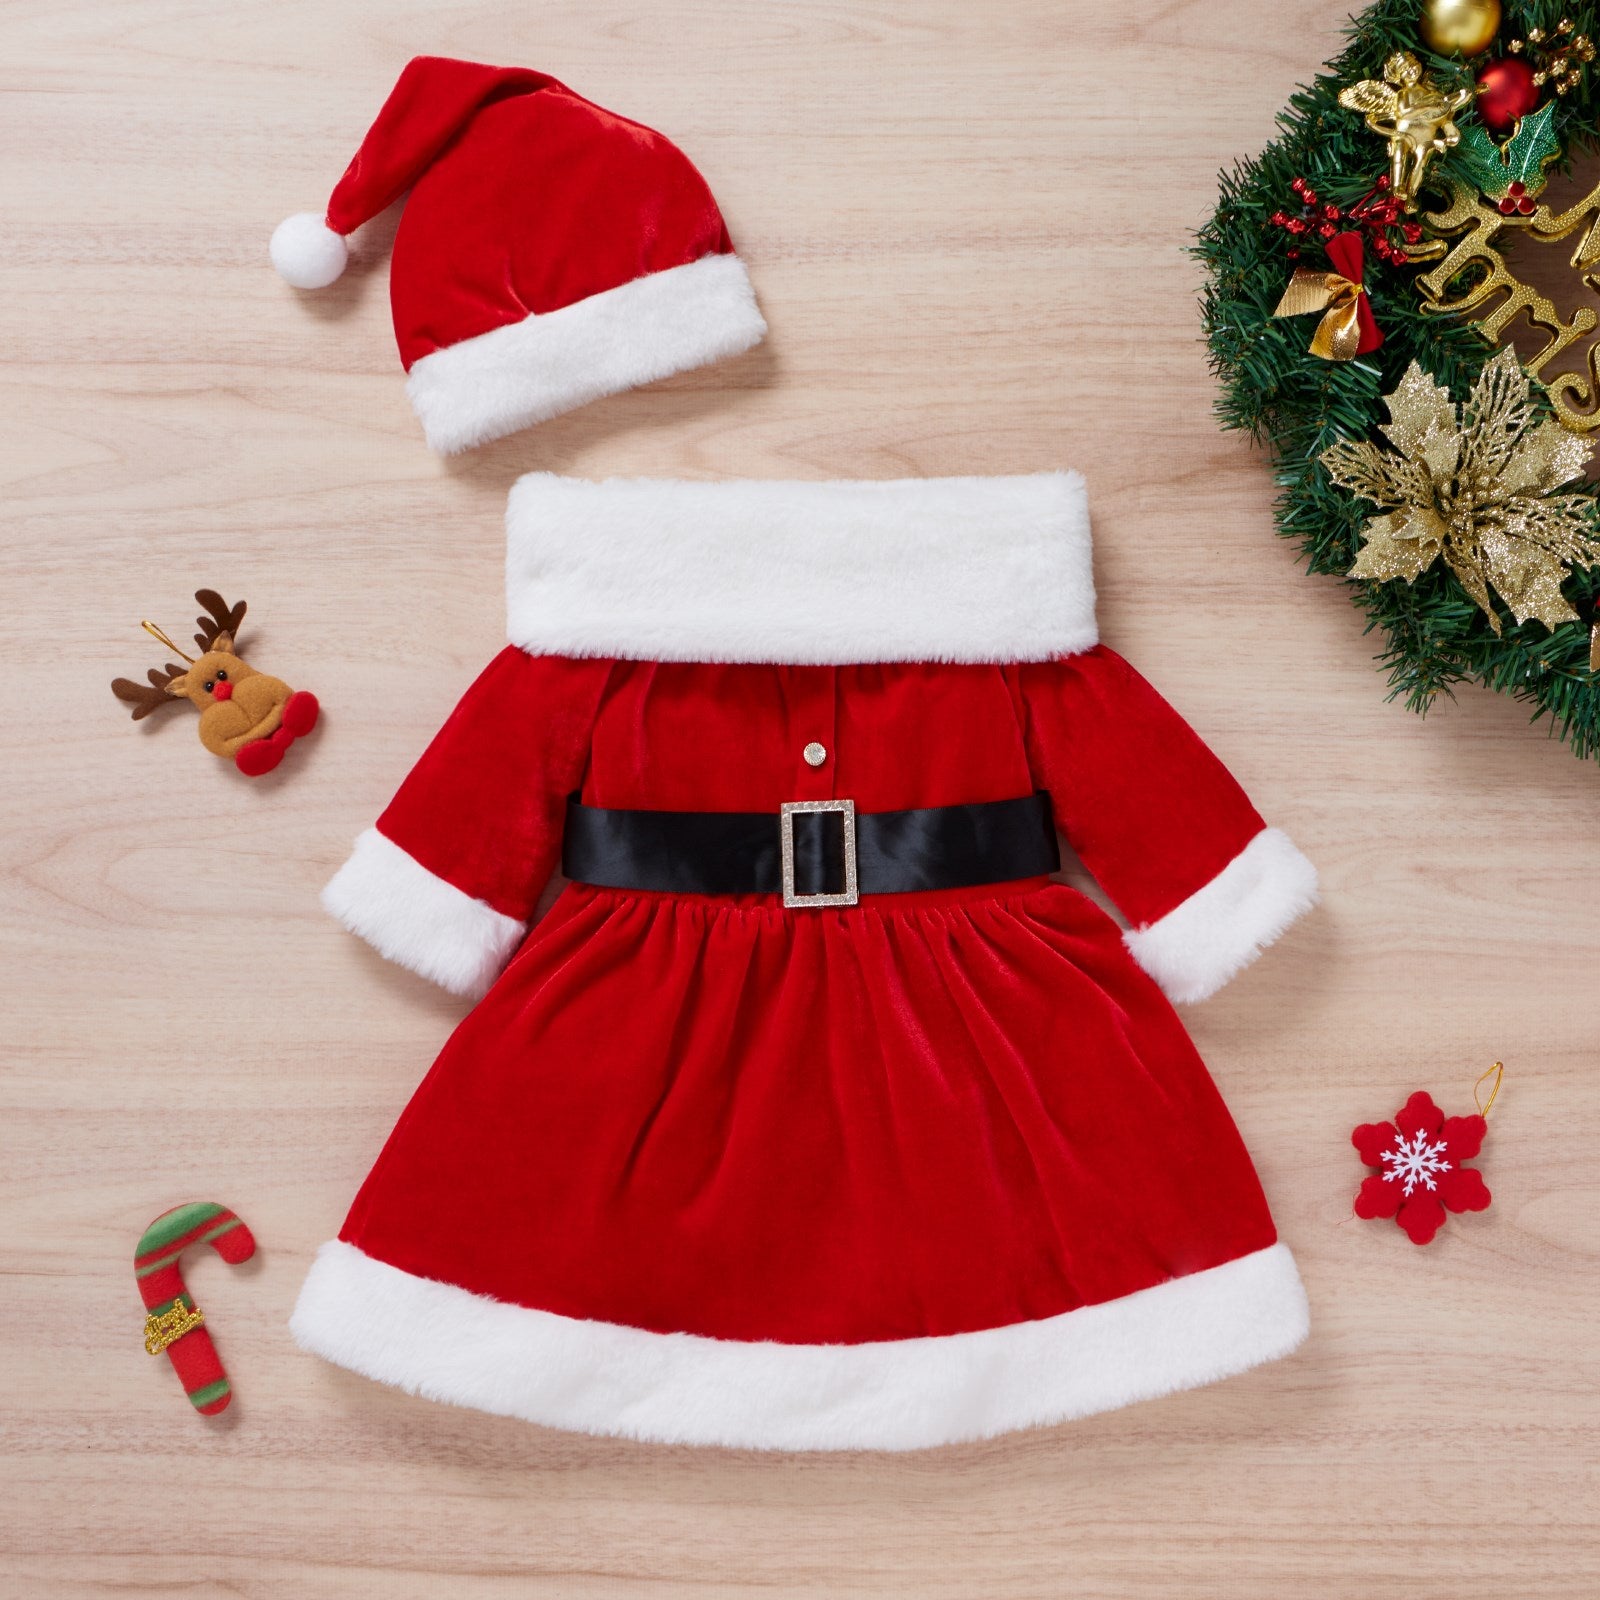 Adorable Toddler Christmas Dress with Hat & Scarf – festive charm for your little one! Available now. image 1